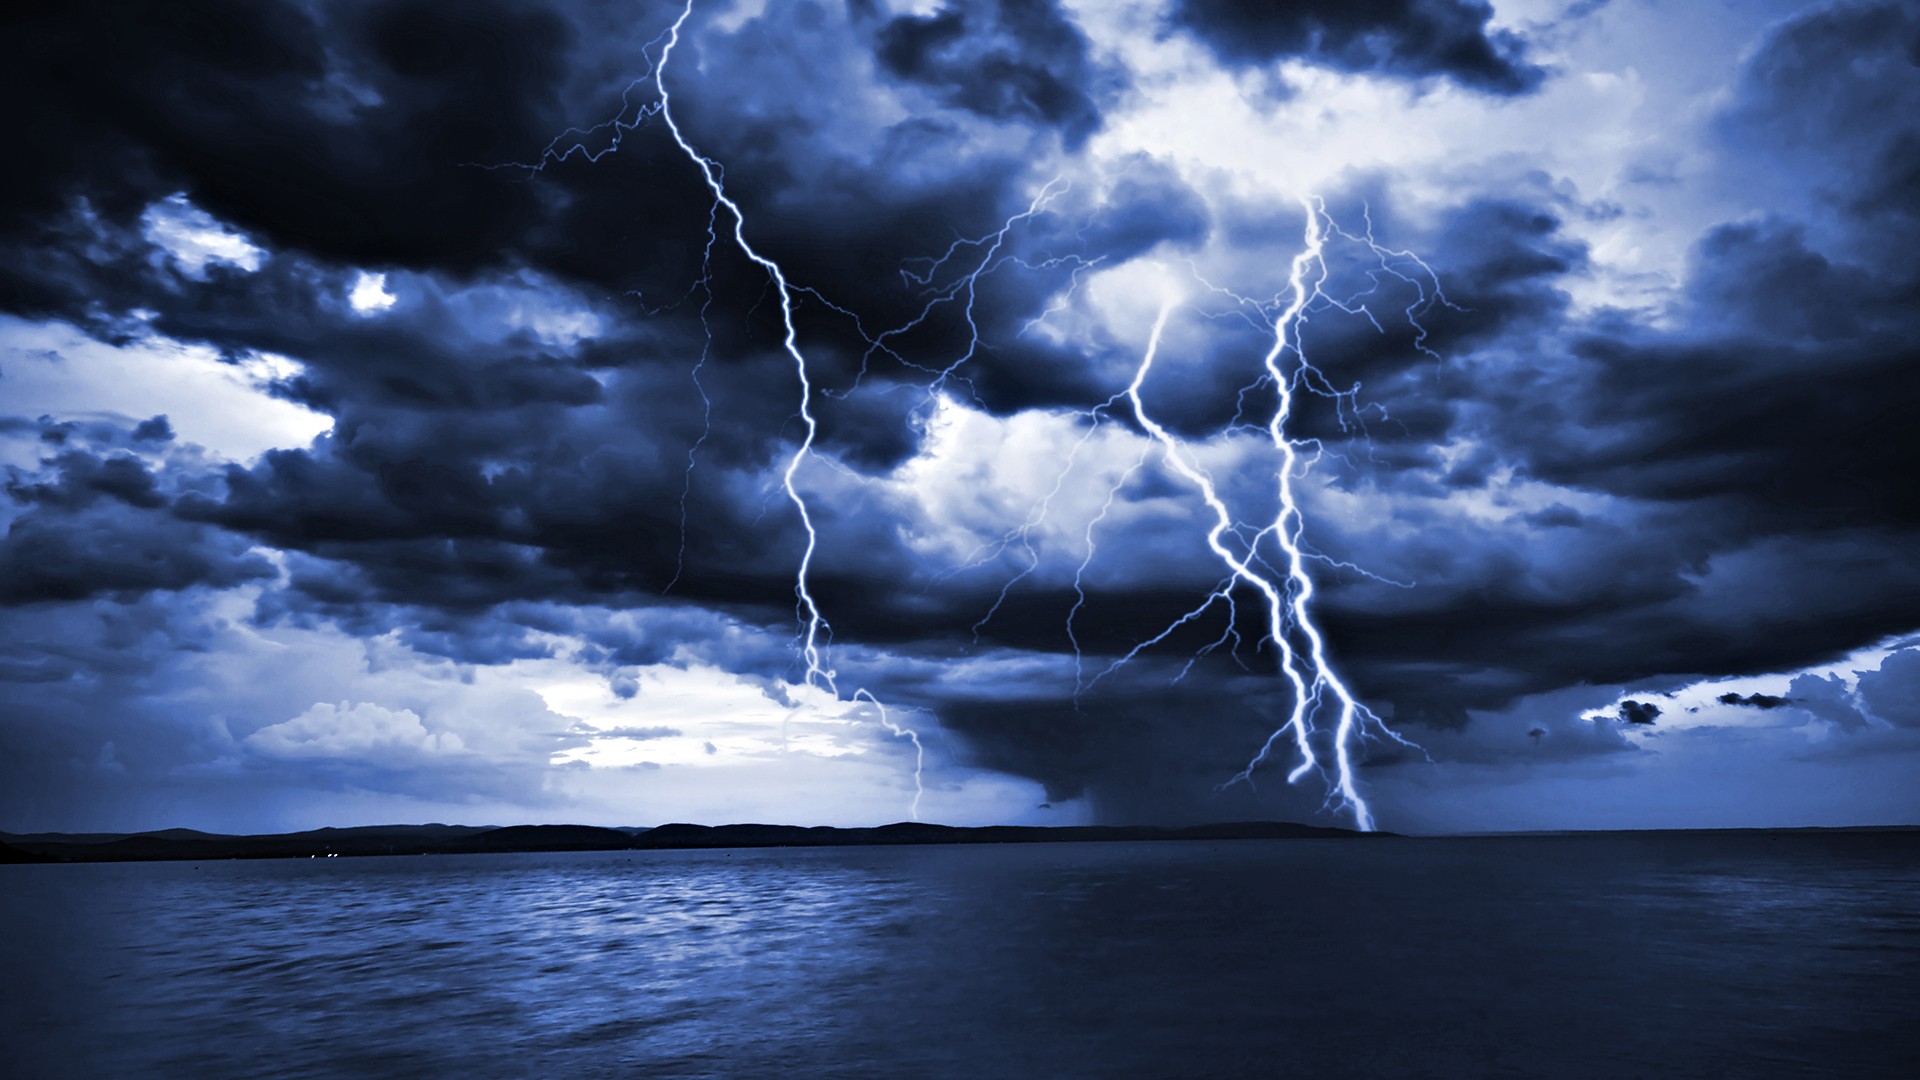 photography, Sea, Water, Lightning, Storm Wallpapers HD / Desktop and